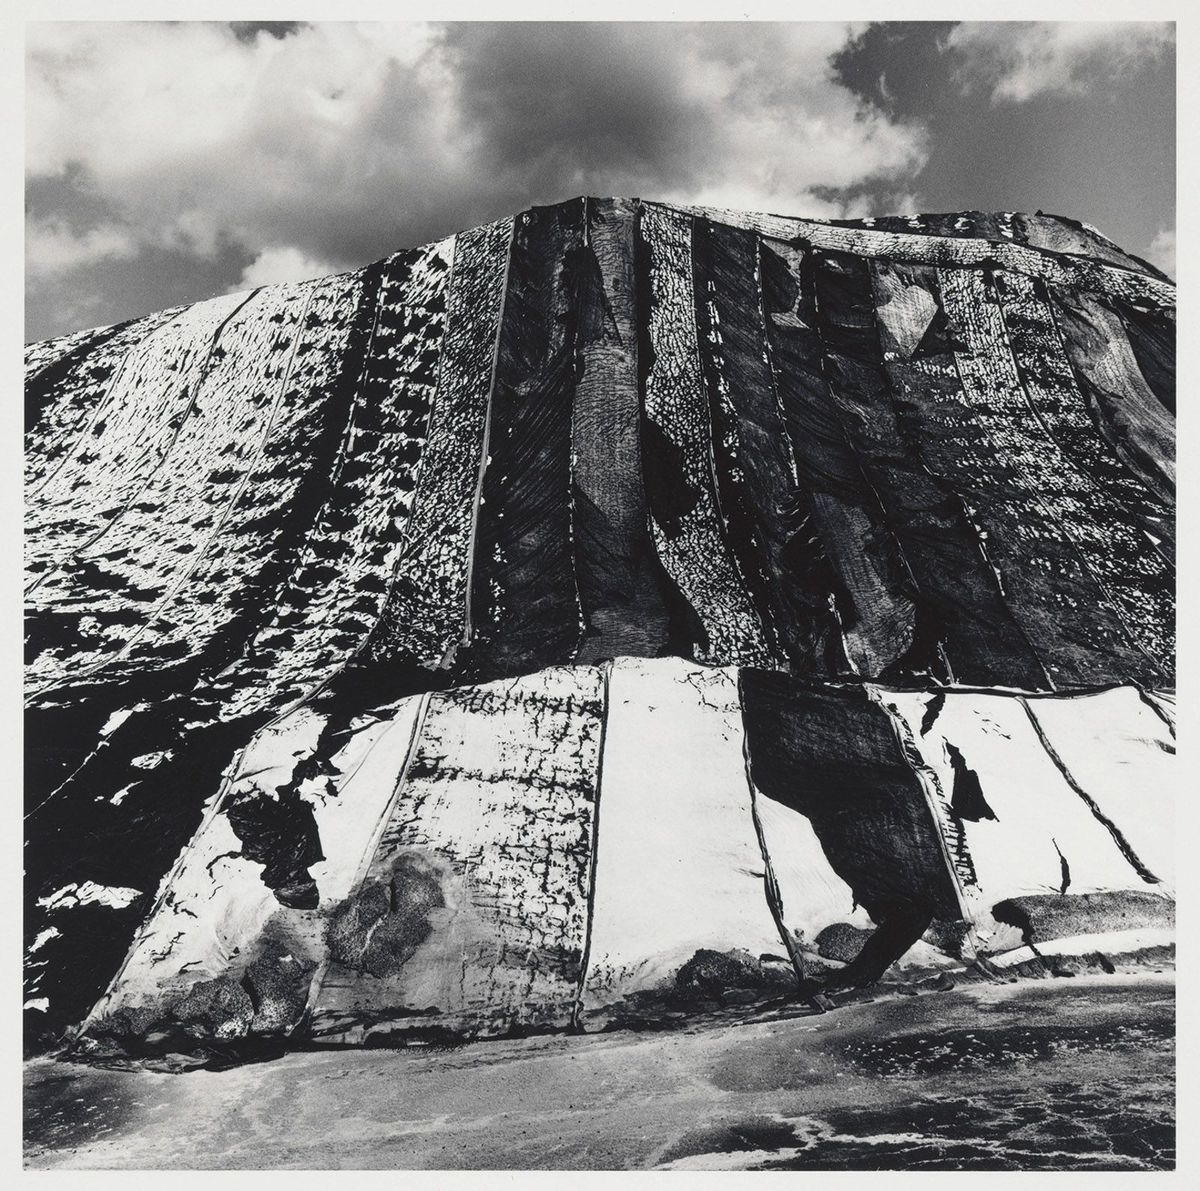 Rich texture and high contrast in Salt Pile (1971) by Al Fennar, who was influenced by Japanese post-war photography © Miya Fennar and The Albert R. Fennar Archive, and Virginia Museum of Fine Arts